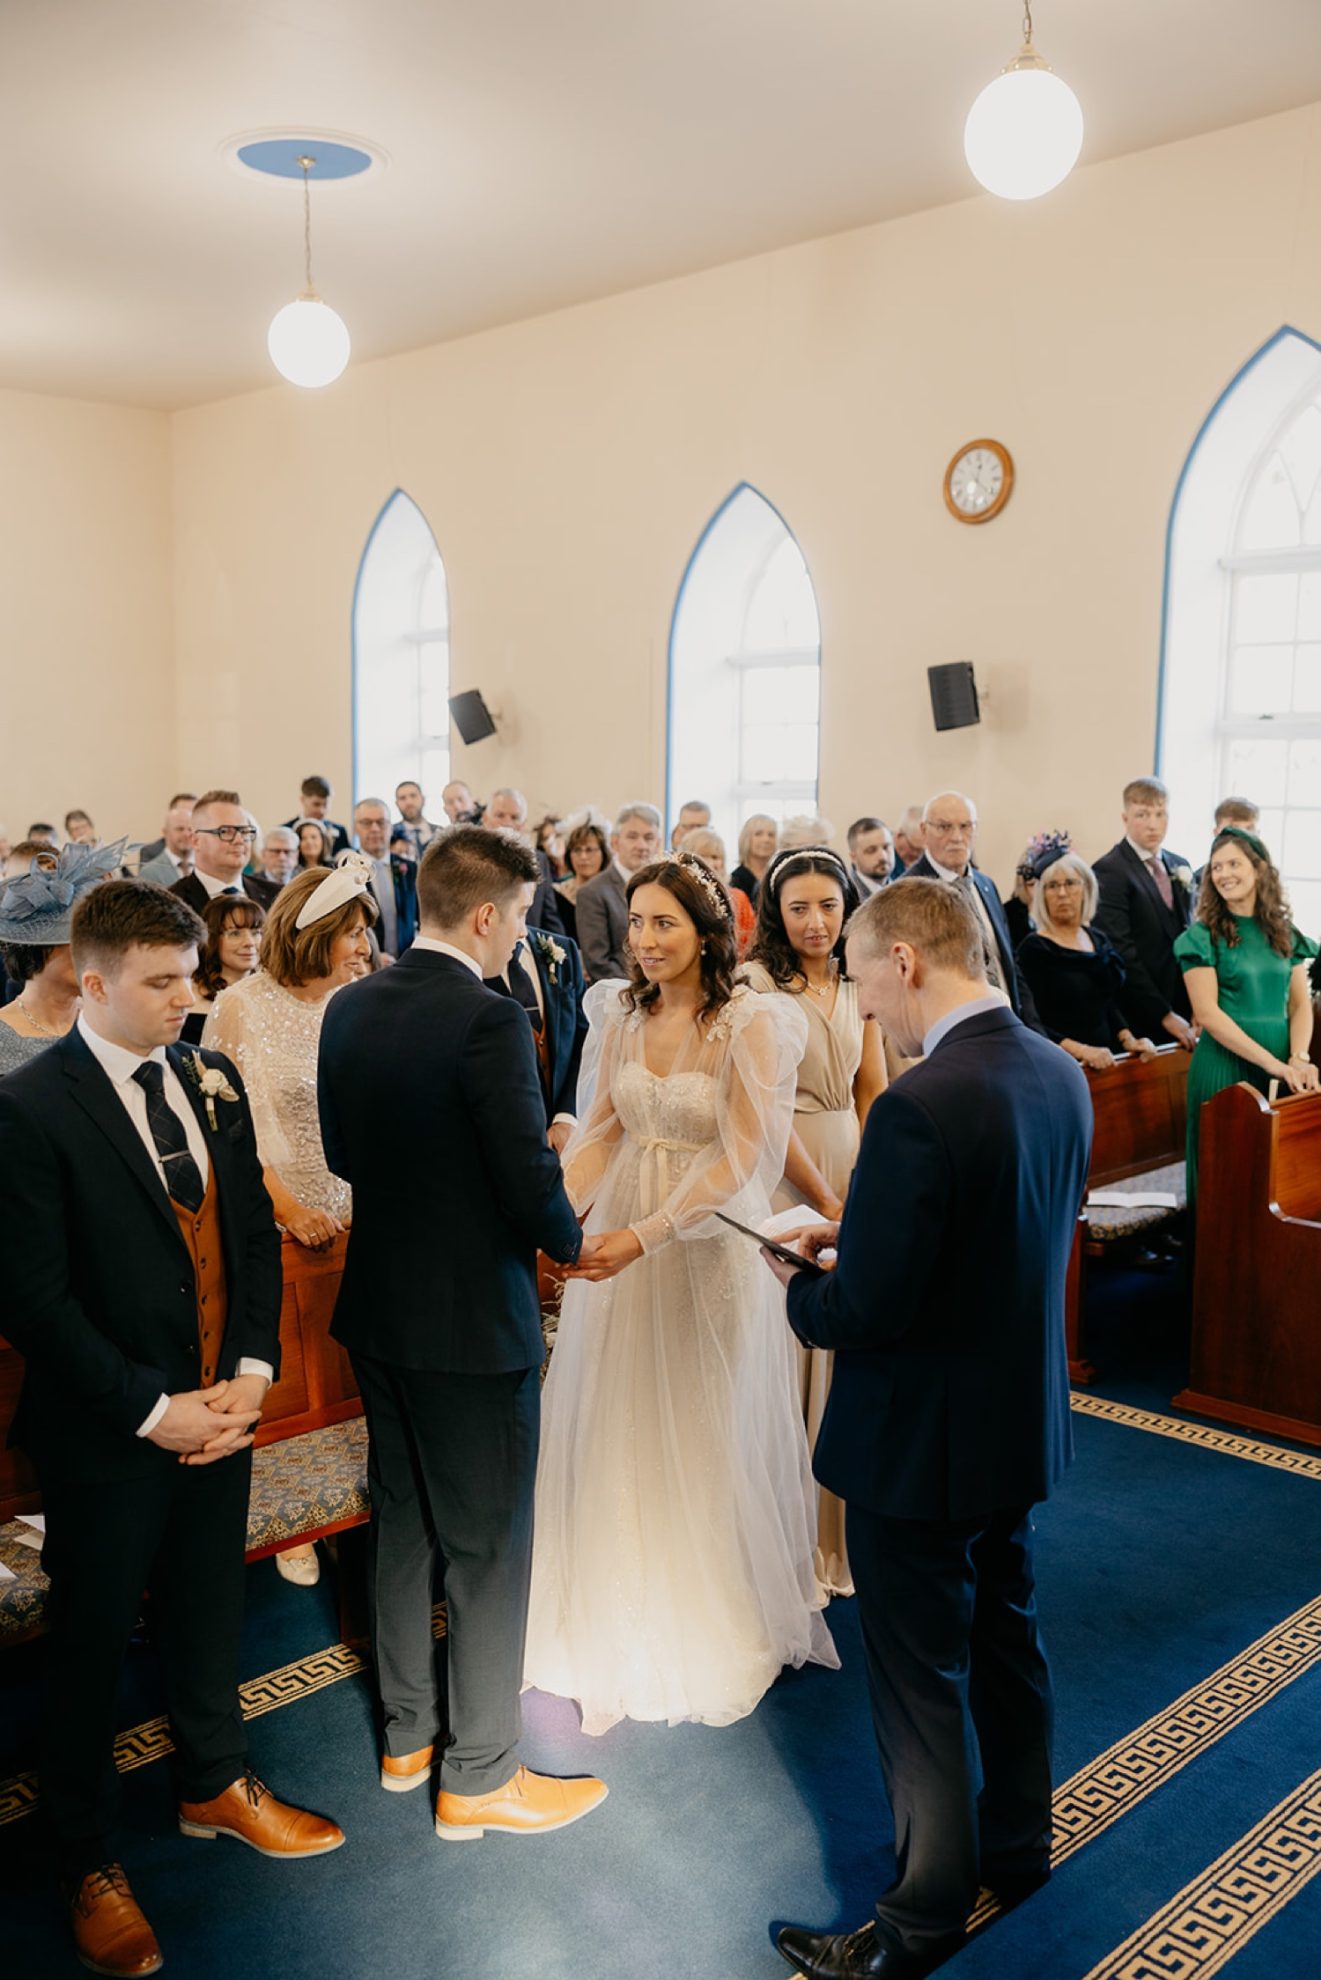 A memorable Day: The wedding ceremony in Loughgall Presbyterian